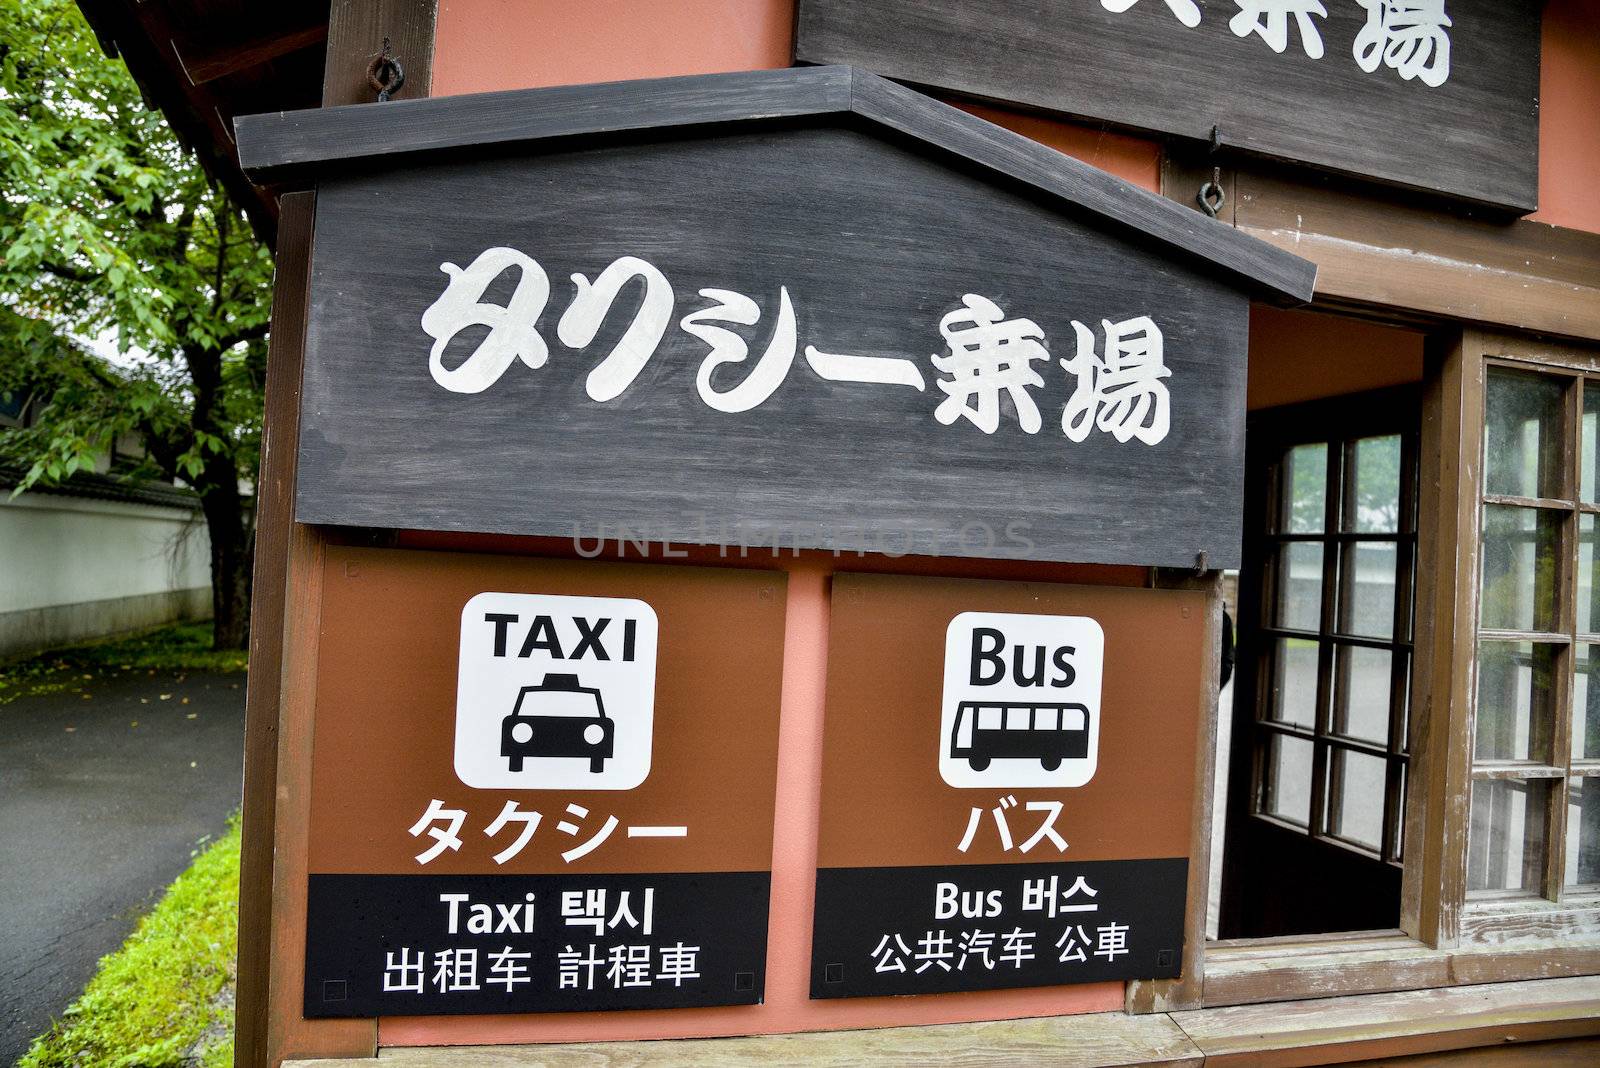 Taxi and bus stop sign in Japan by gjeerawut